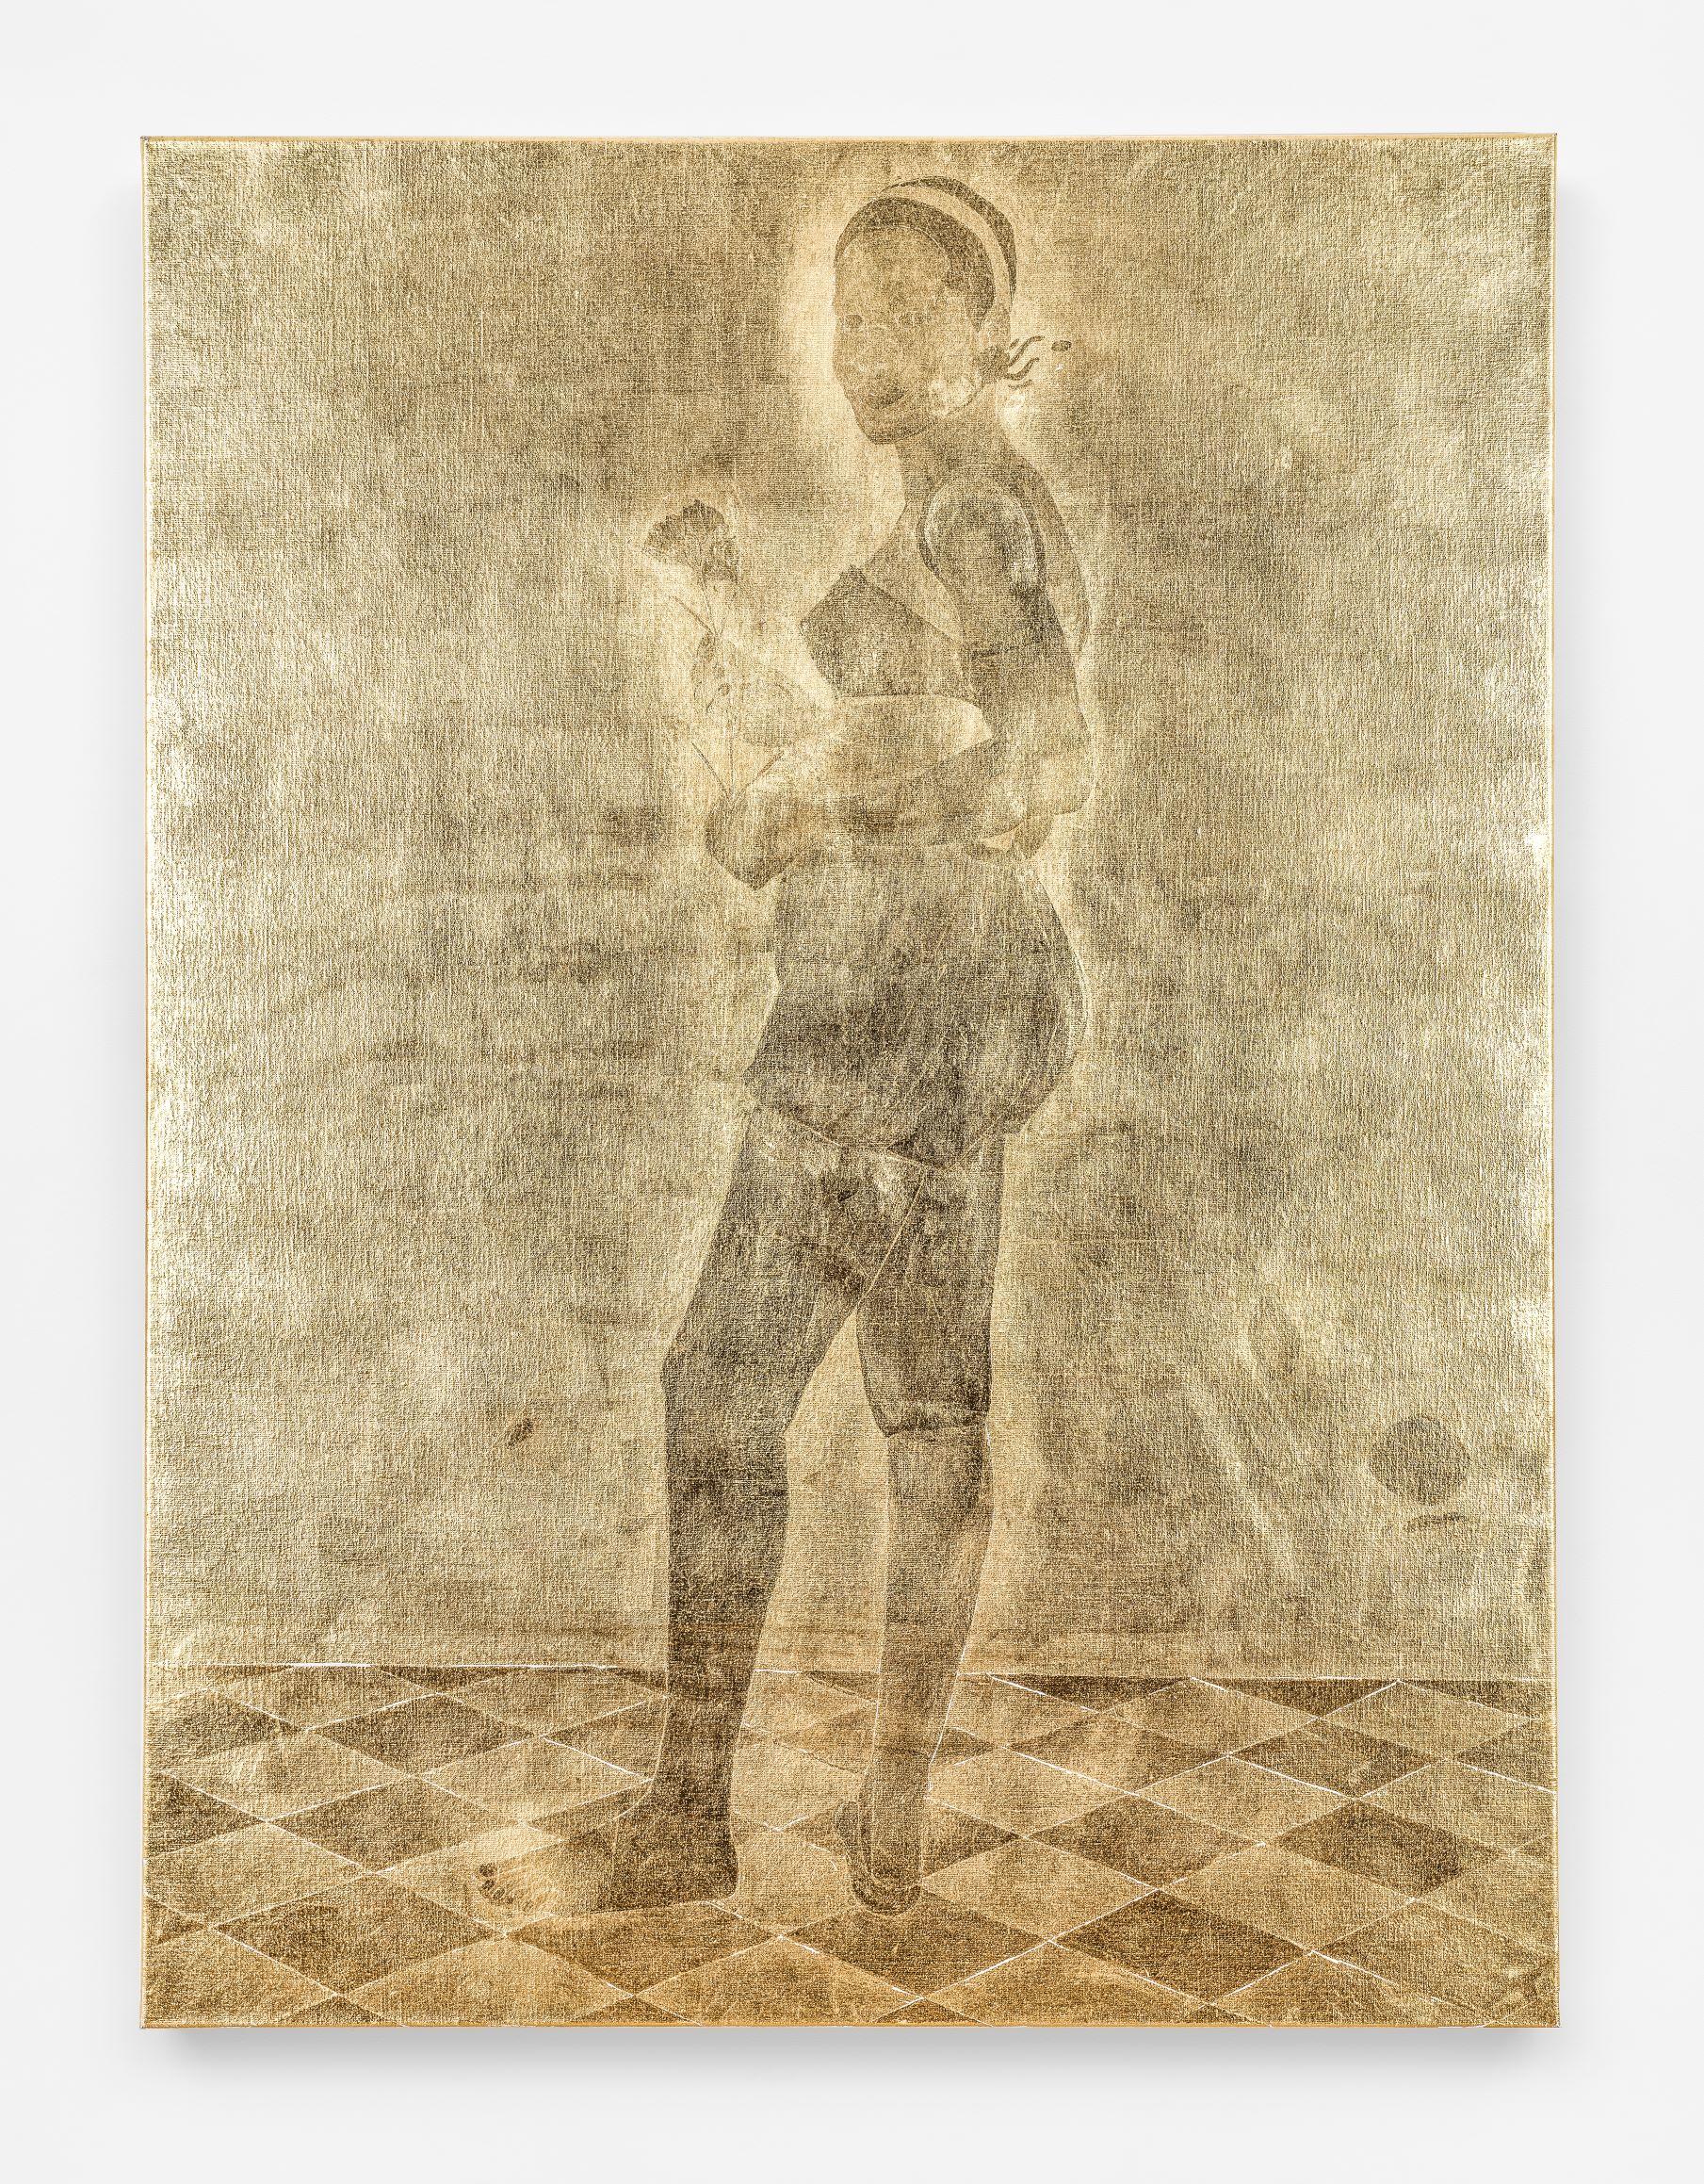 This image is done in 22-karat gold leaf on linen, which produces an image that is mottled black and gray against a gold background. There is a light area outlining the central figure that perhaps suggests a light source behind her. The central figure is a dark-skinned woman standing barefoot on a gold and black checkerboard tile floor. She is viewed from the rear, slightly turned toward the viewer’s left, wearing a dark bra and shorts. Her weight is on her back leg to our right as her body turns to our lef